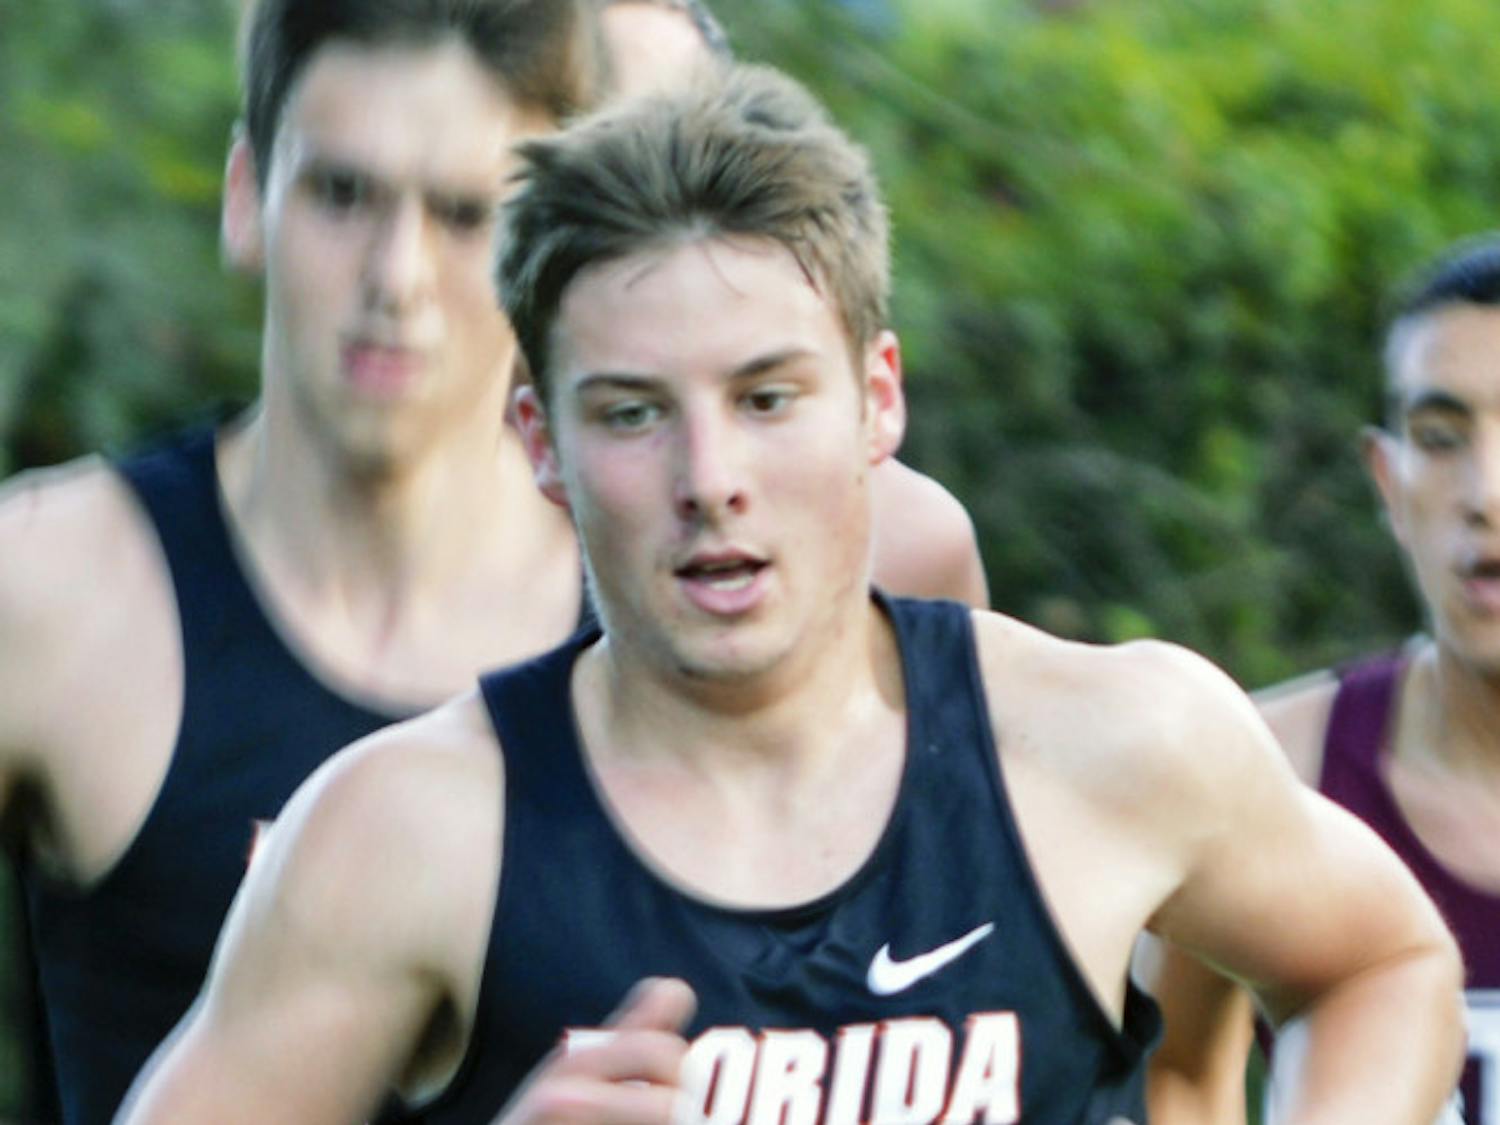 Jimmy Clark races during the 2013 Southeastern Conference Cross Country Championships at the Mark Bostick Golf Course